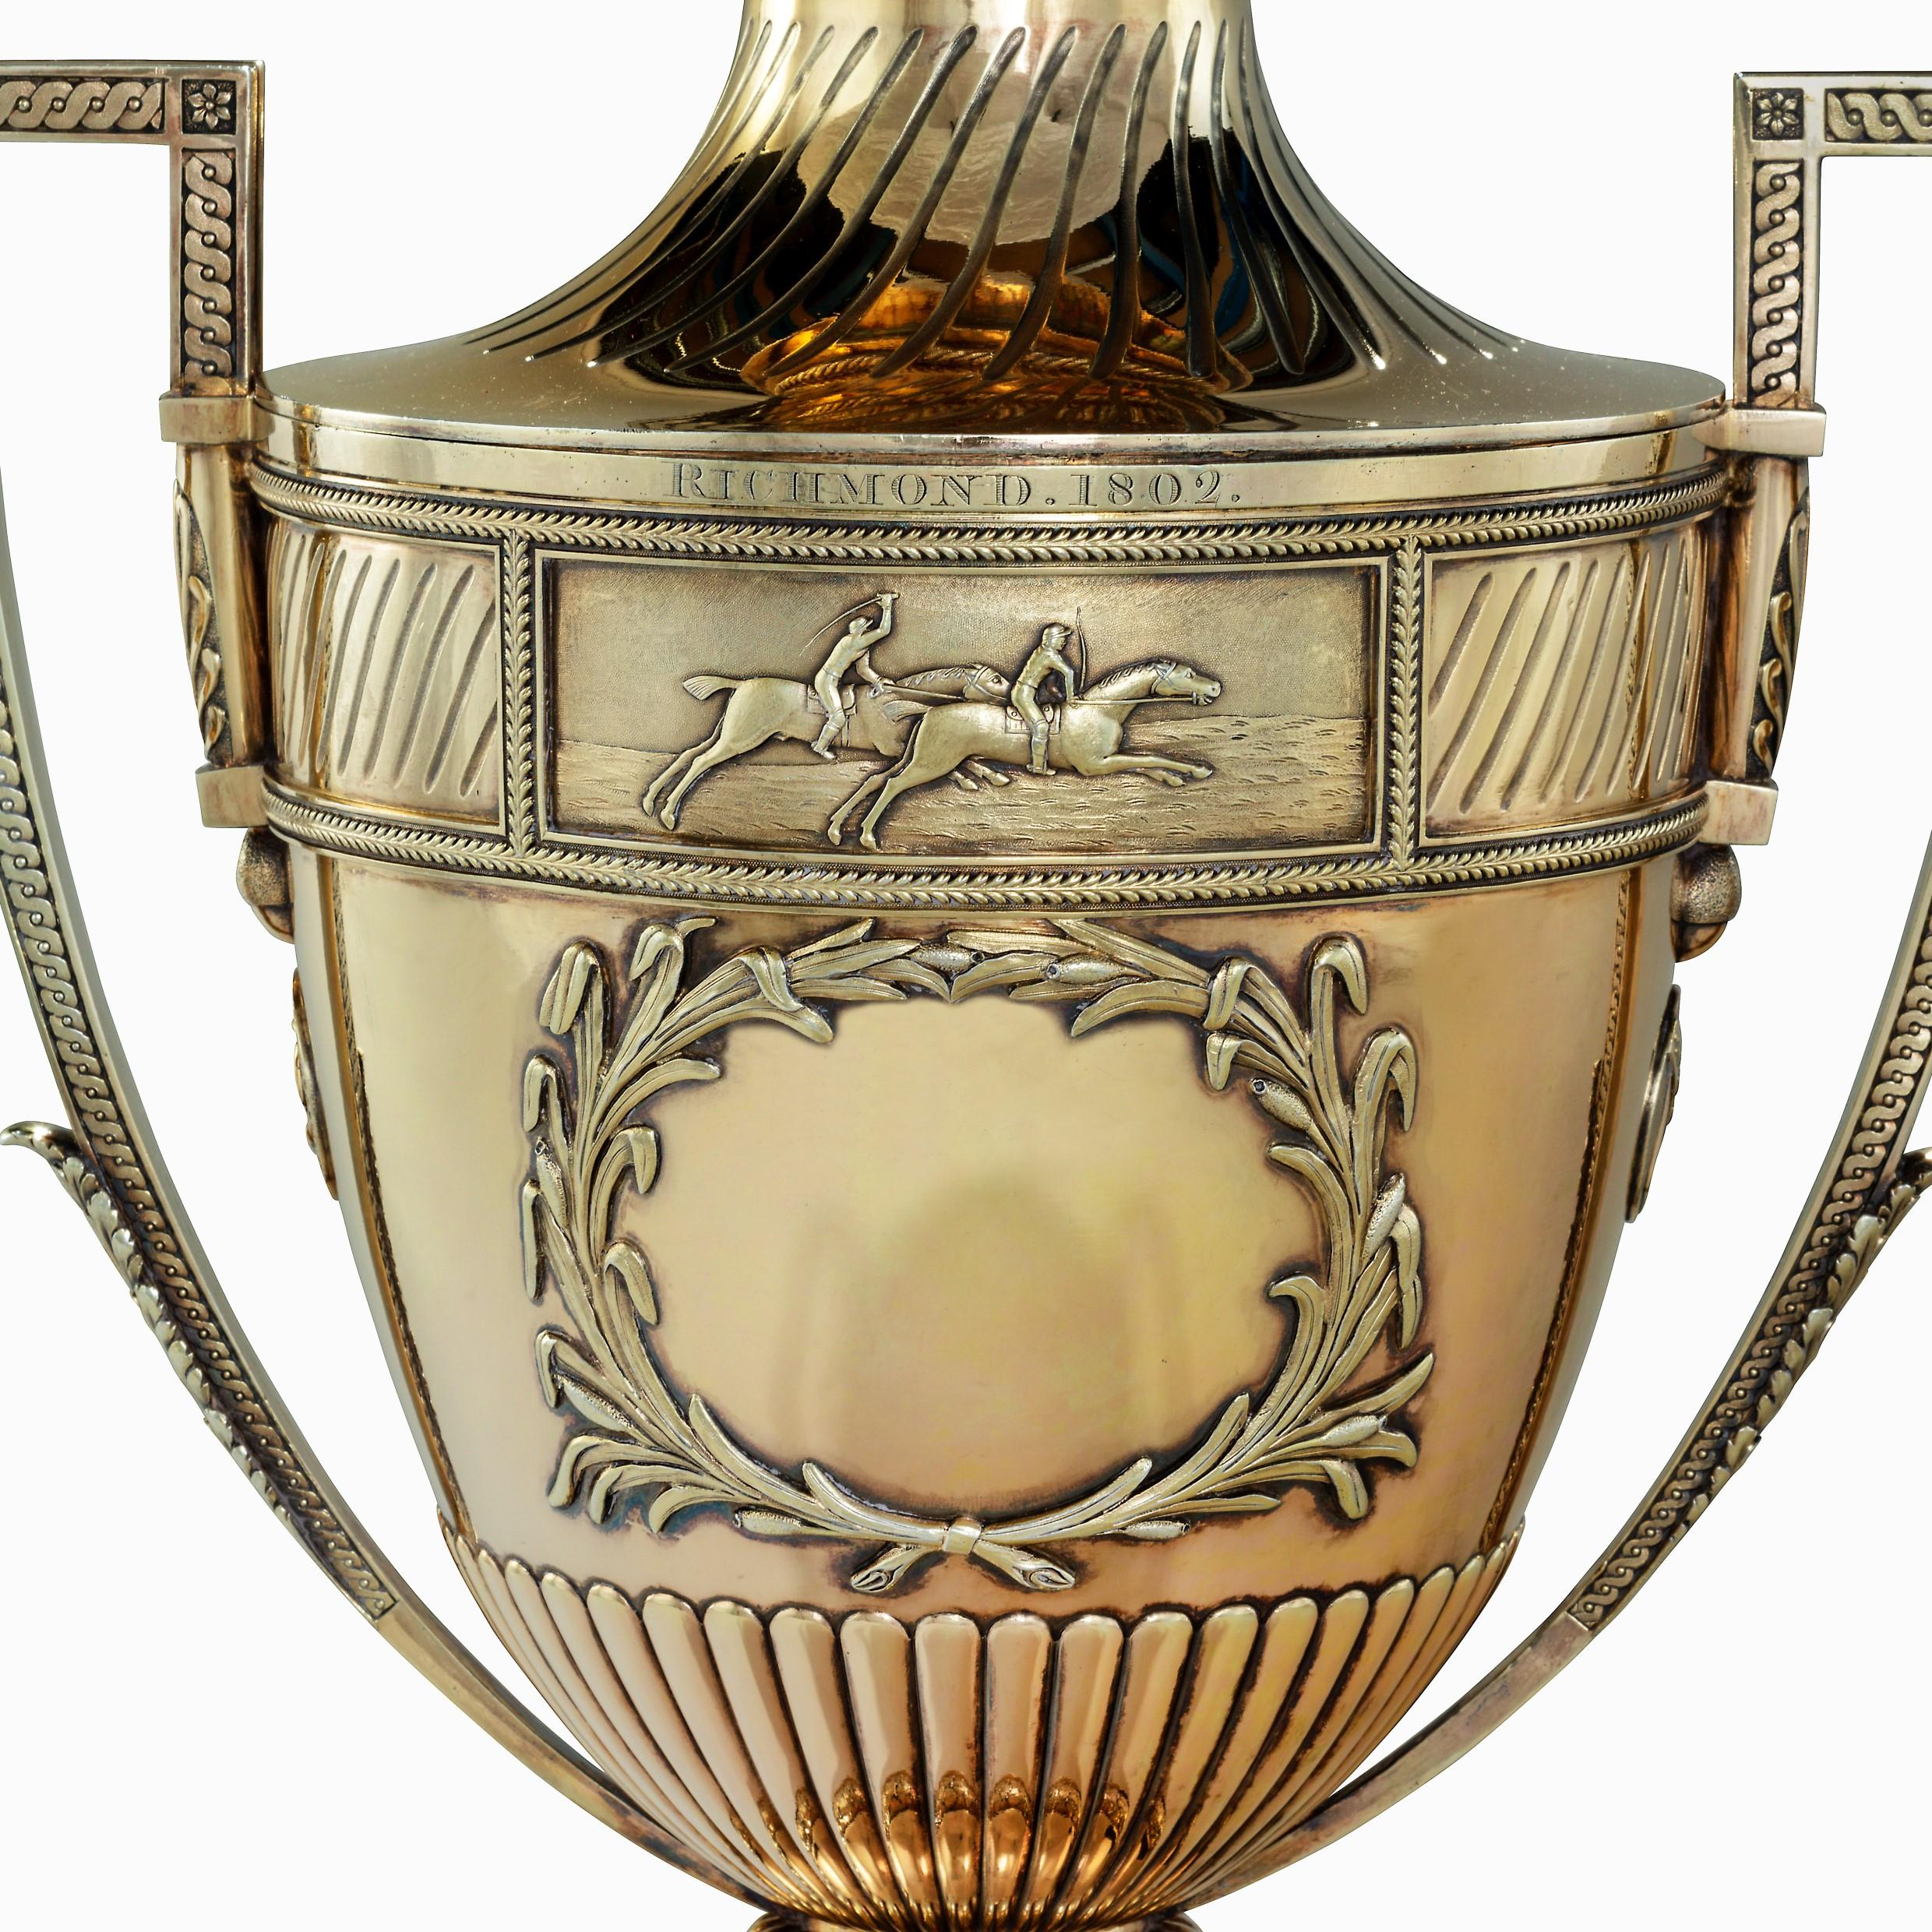 1802, Richmond “Gold Cup”, by Robert Adam, Paul Storr and Robert Makepeace For Sale 2